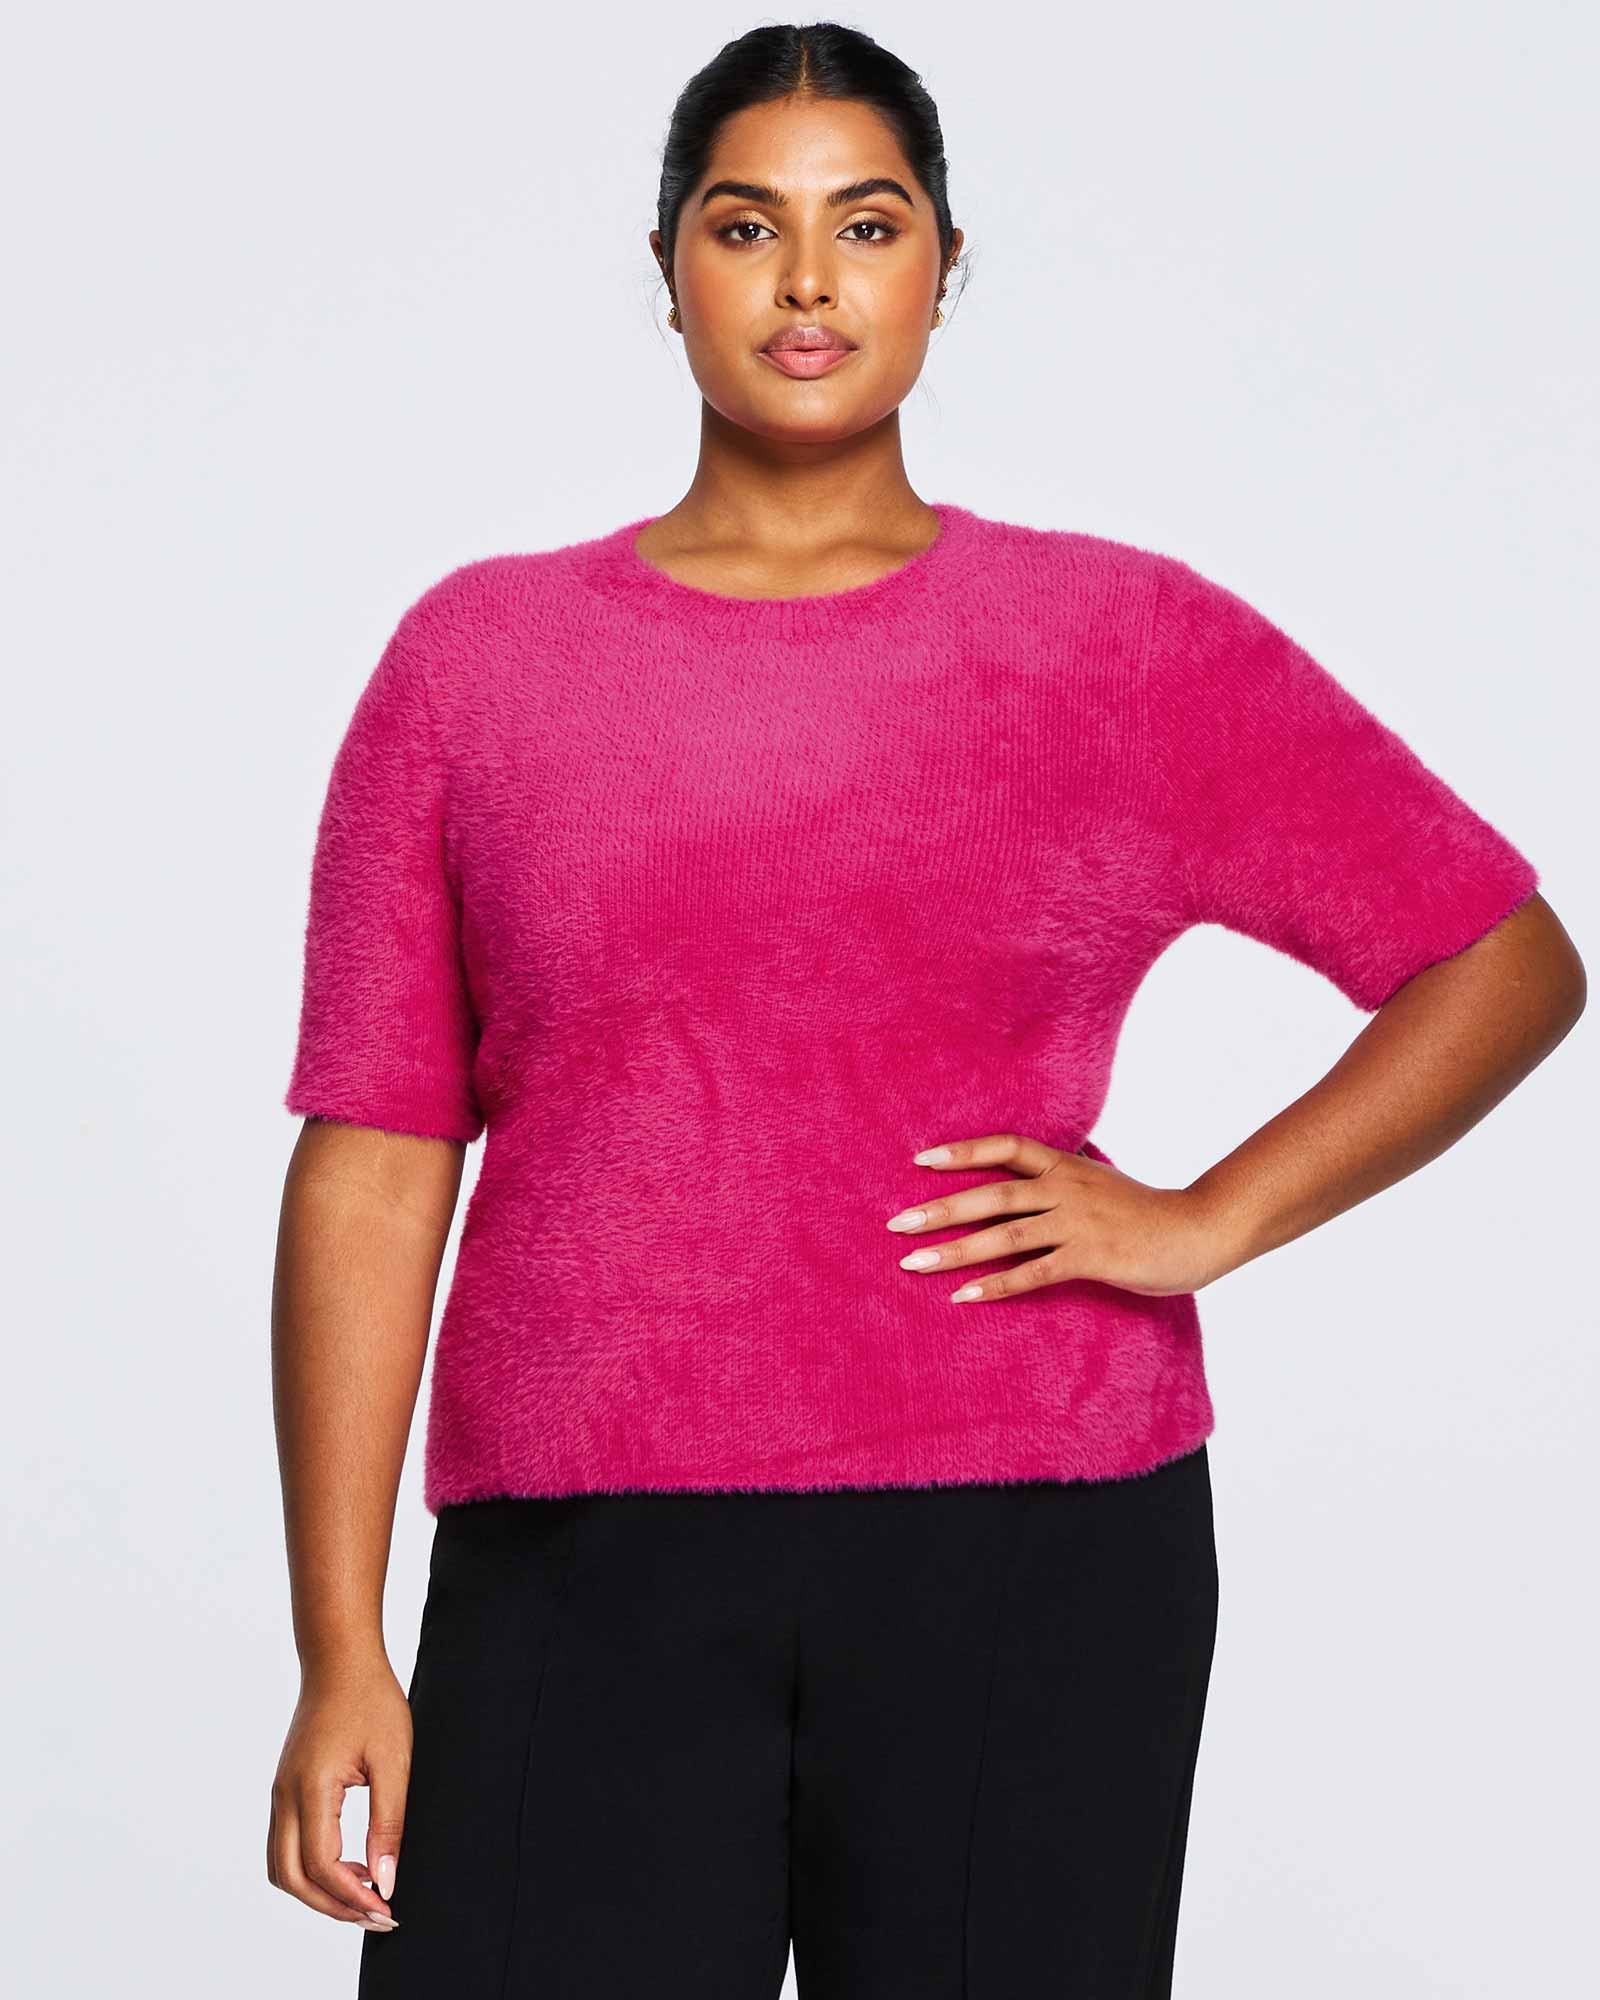 A plus-size woman wearing a Nora Fuzzy Pink Short Sleeved Sweater.